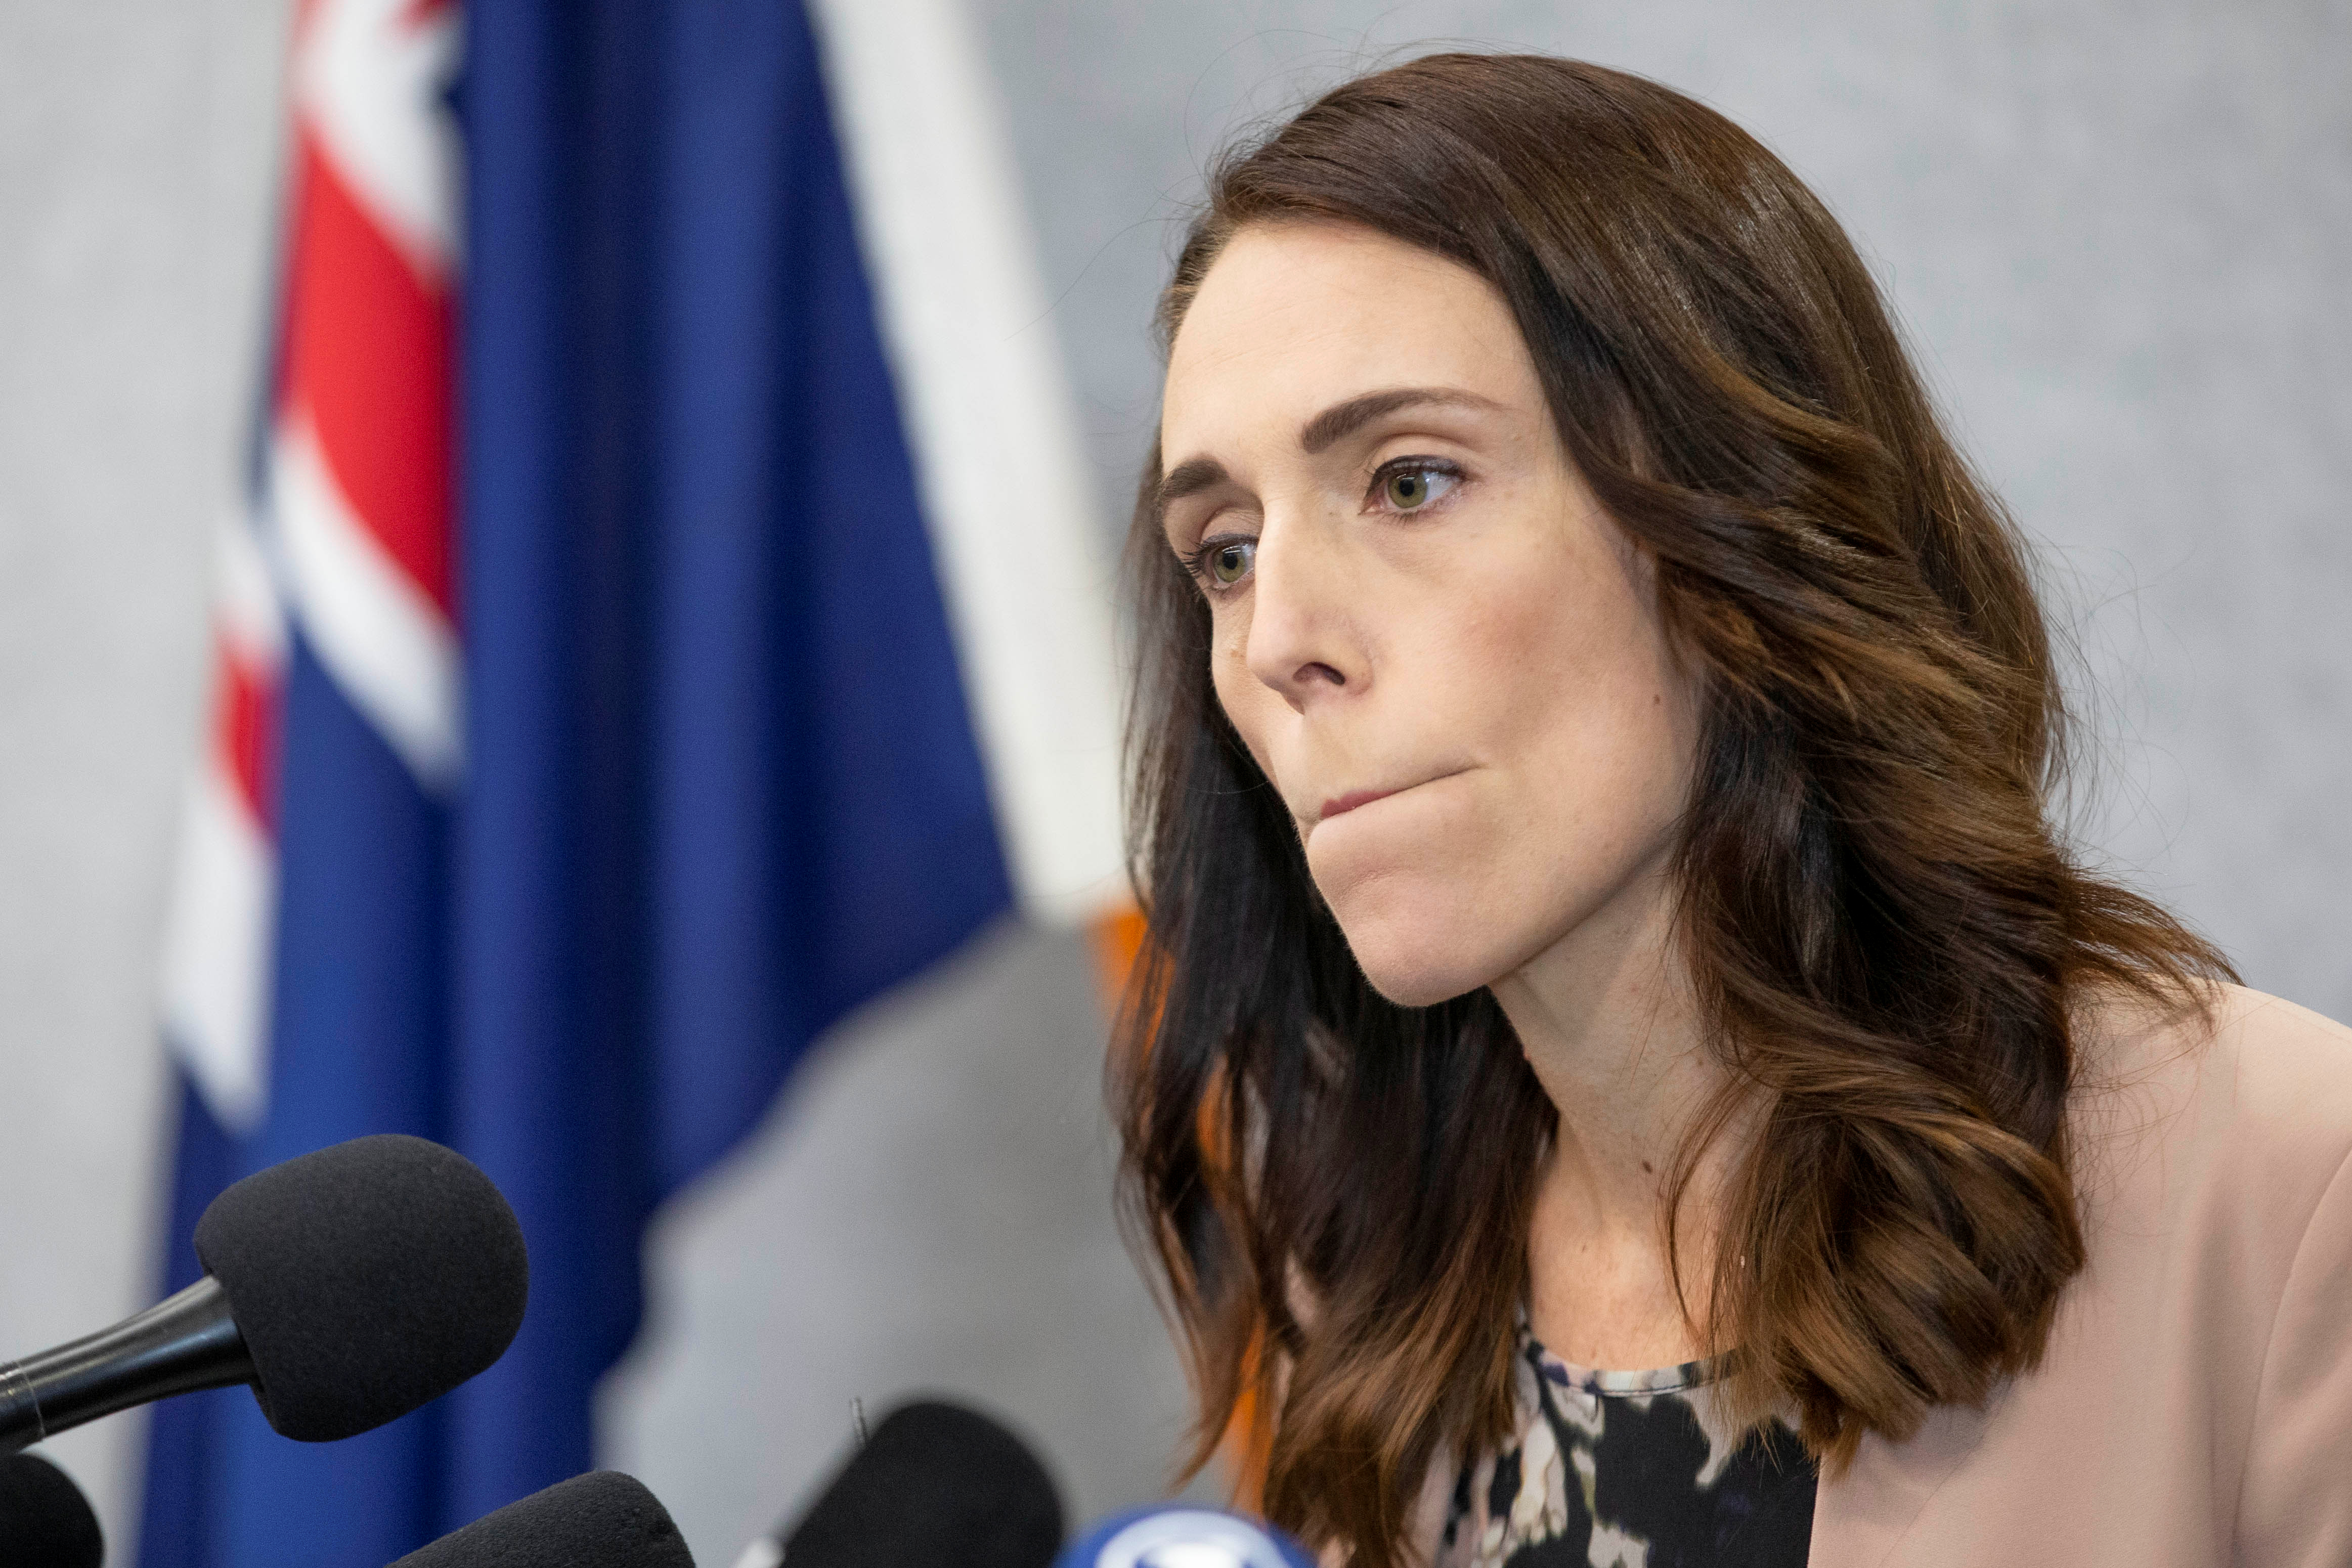 &copy; Reuters. New Zealand Prime Minister Jacinda Ardern pauses during a news conference prior to the anniversary of the mosque attacks that took place the prior year in Christchurch